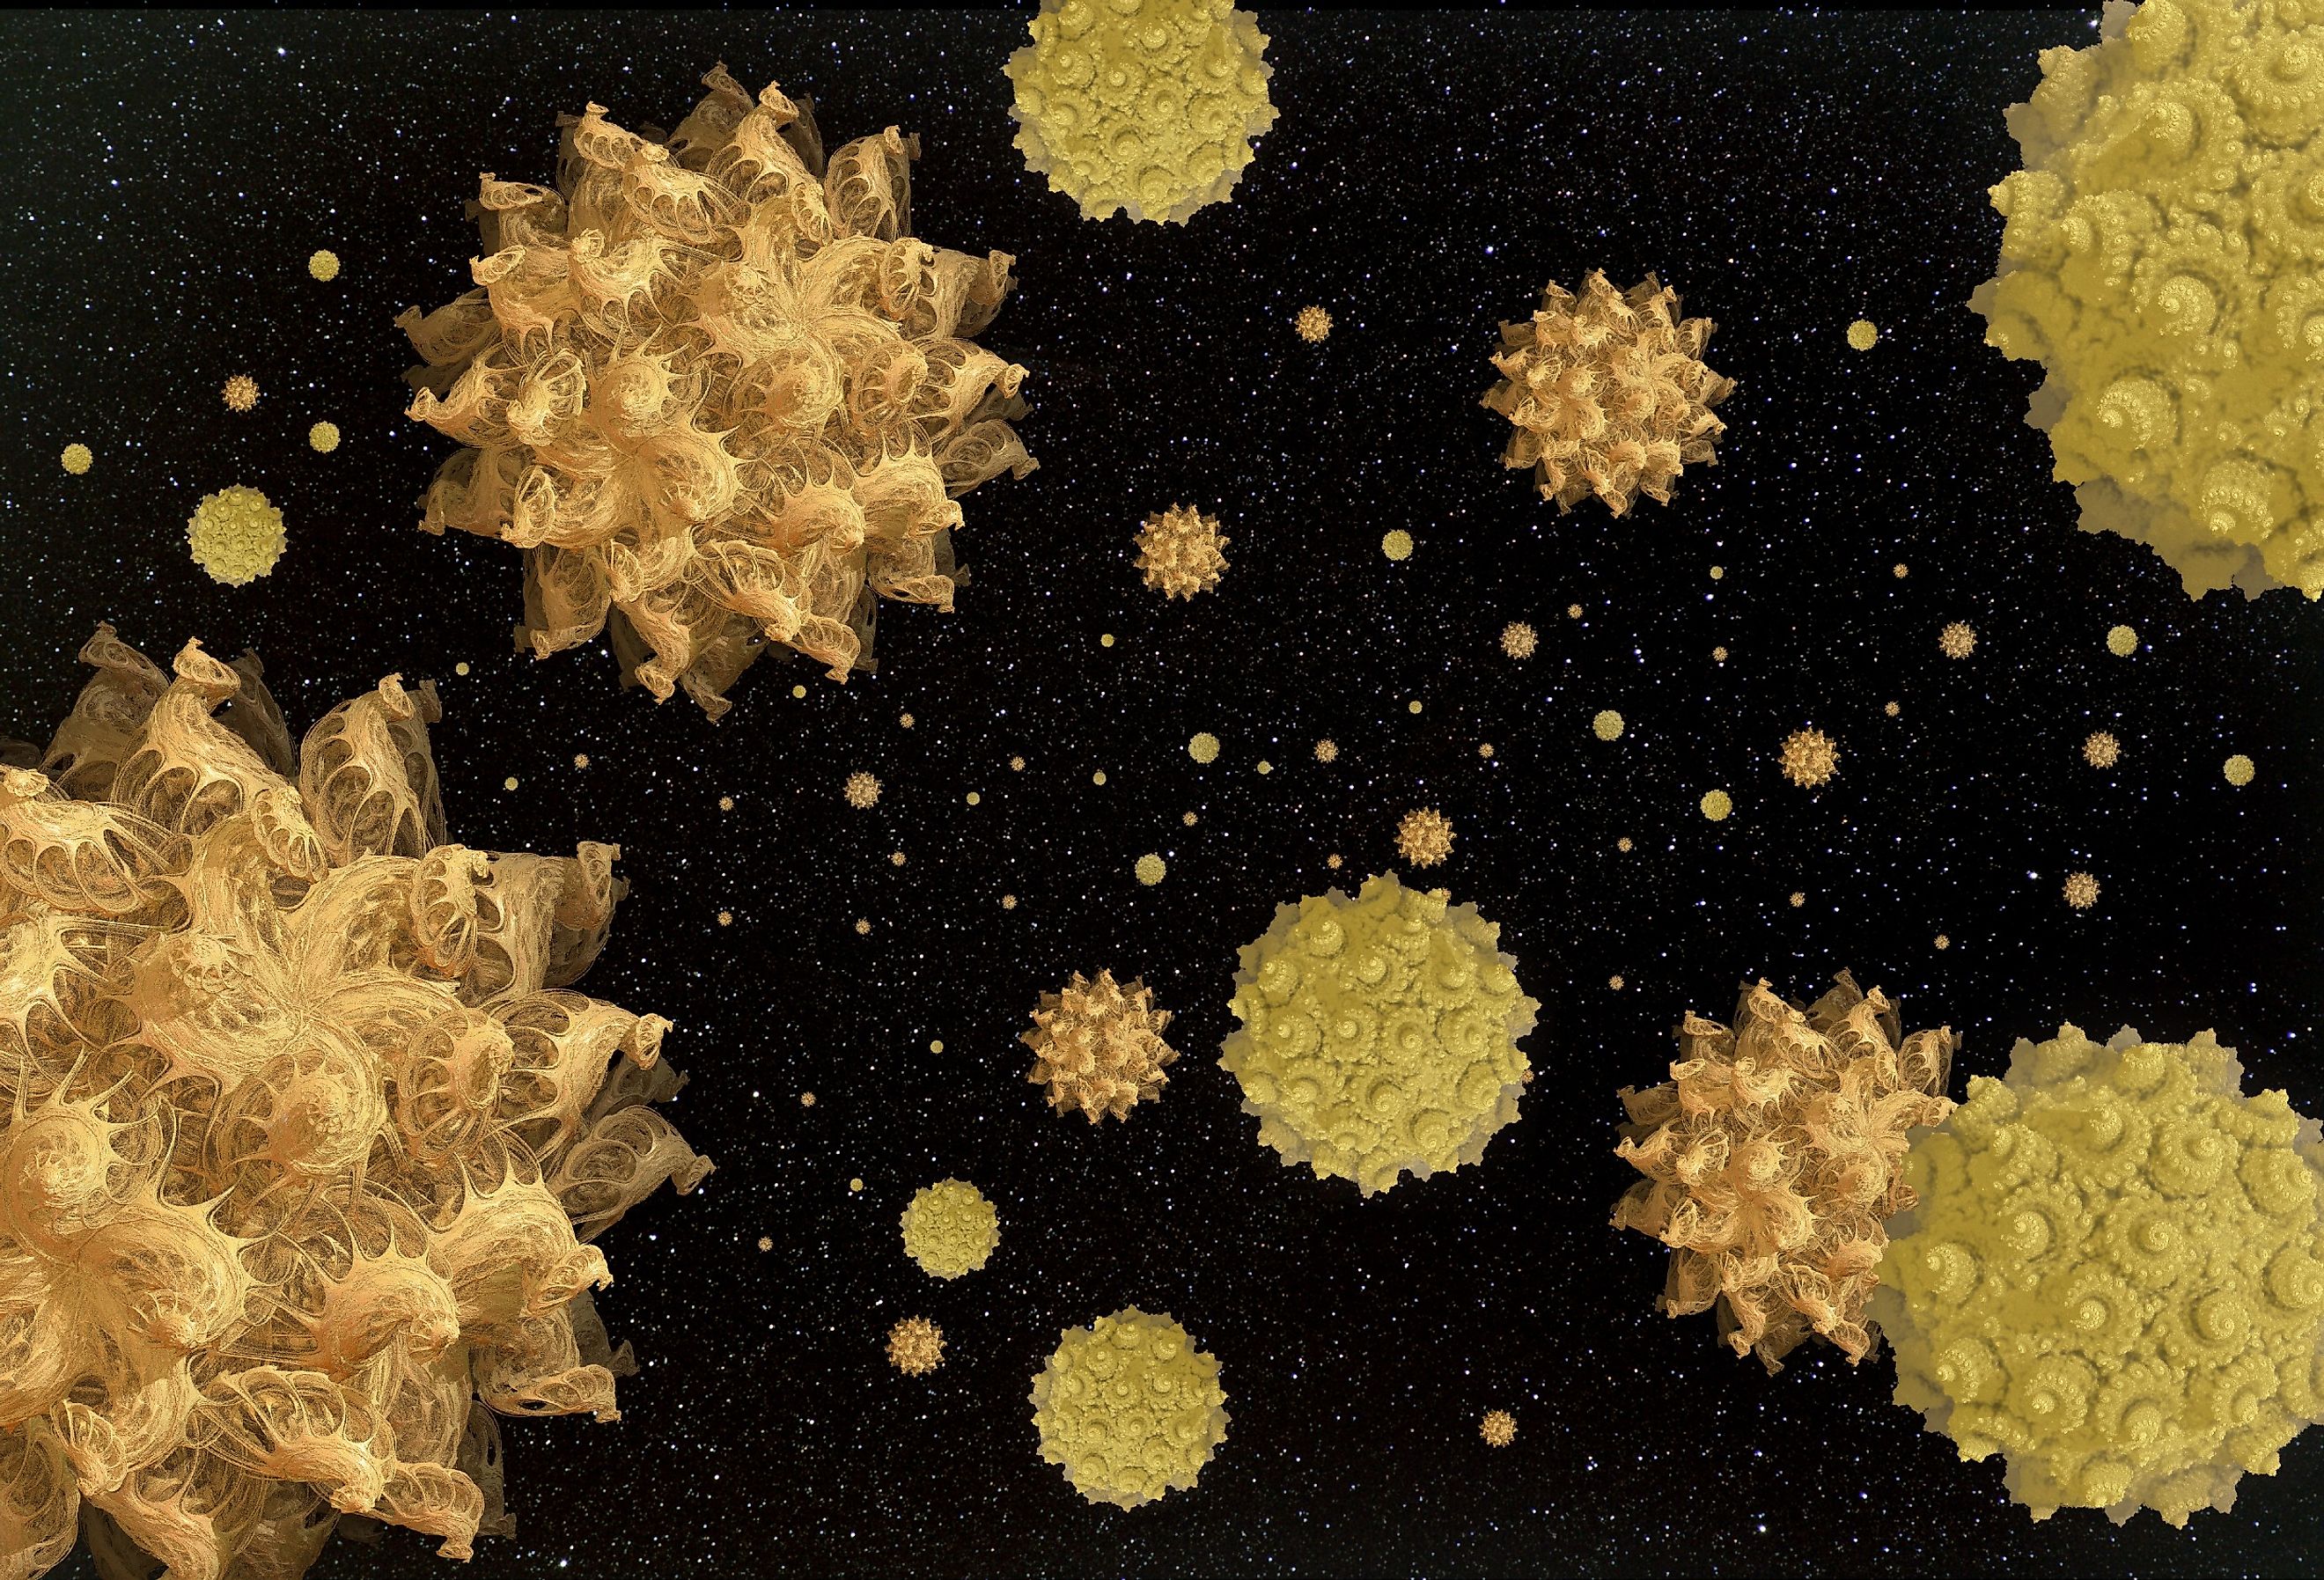 Seeds of bacteria or alien life in space, concept of Panspermia.